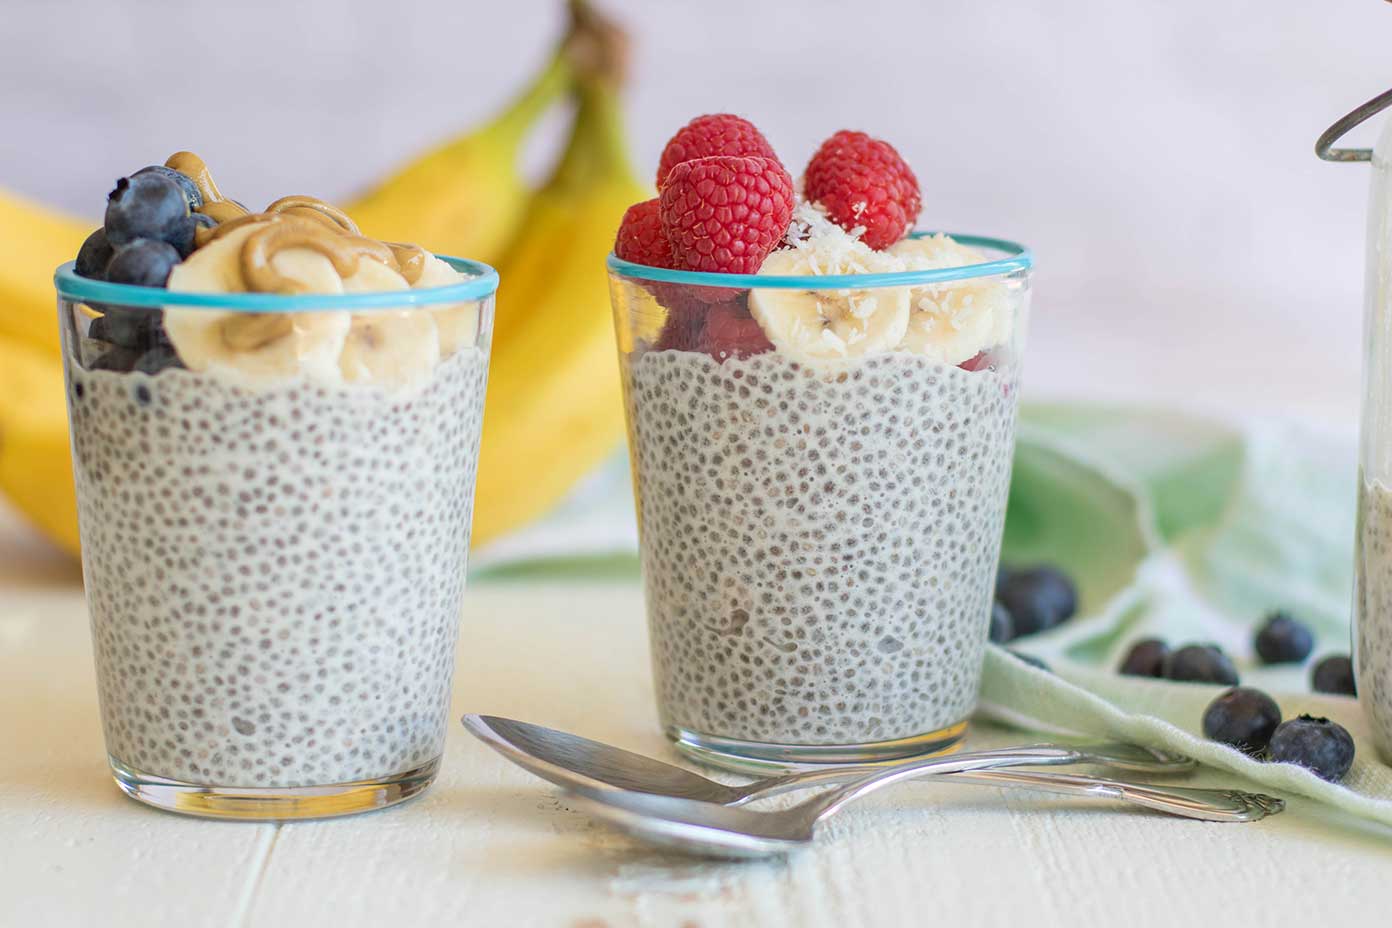 I’m Sorry to Make You Feel Old, But Only Millennials Have Eaten at Least 9/17 of These Foods Chia pudding